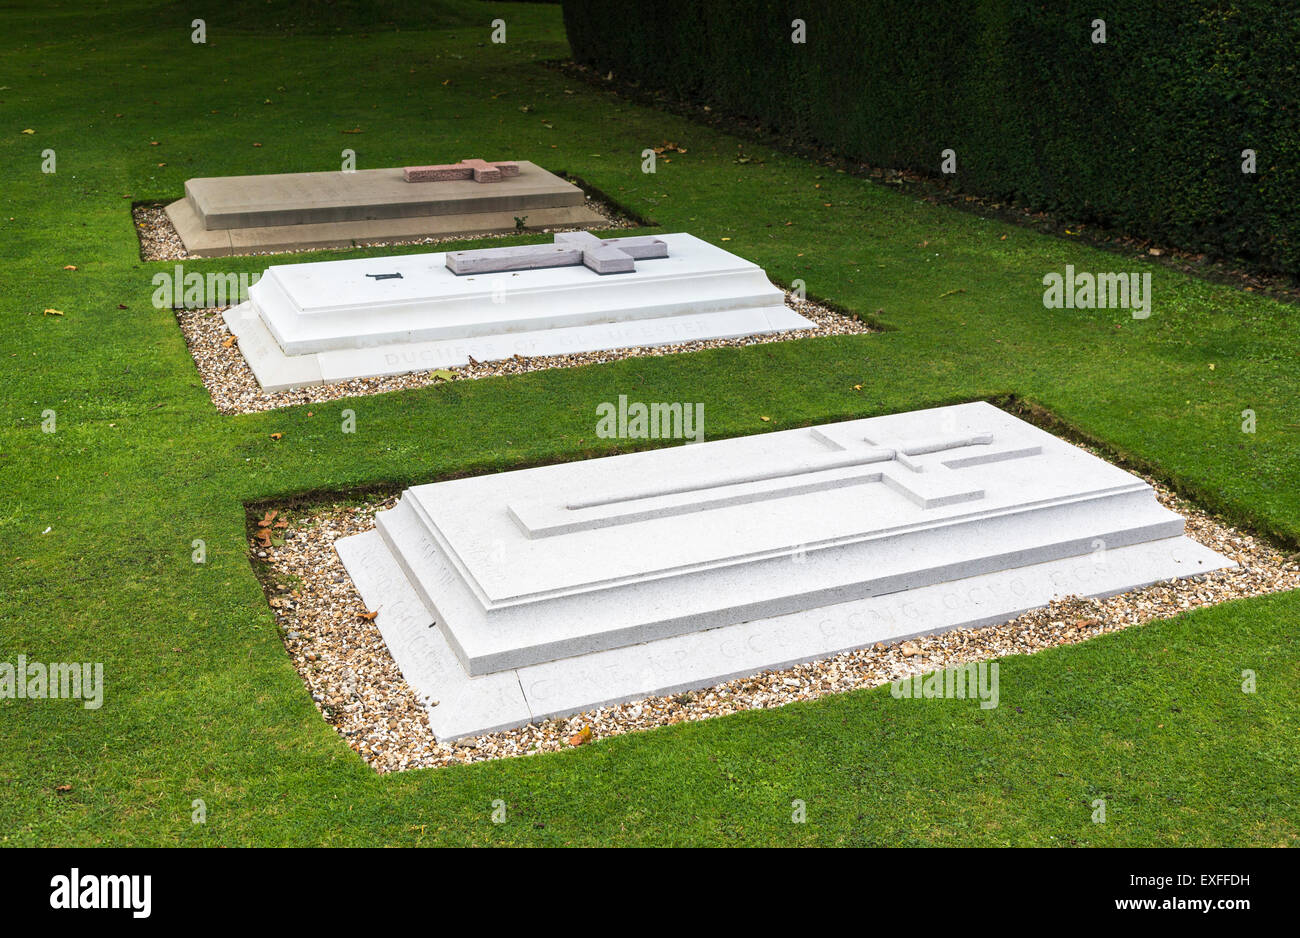 gravestones of the duke and duchess of gloucester in the royal burial EXFFDH